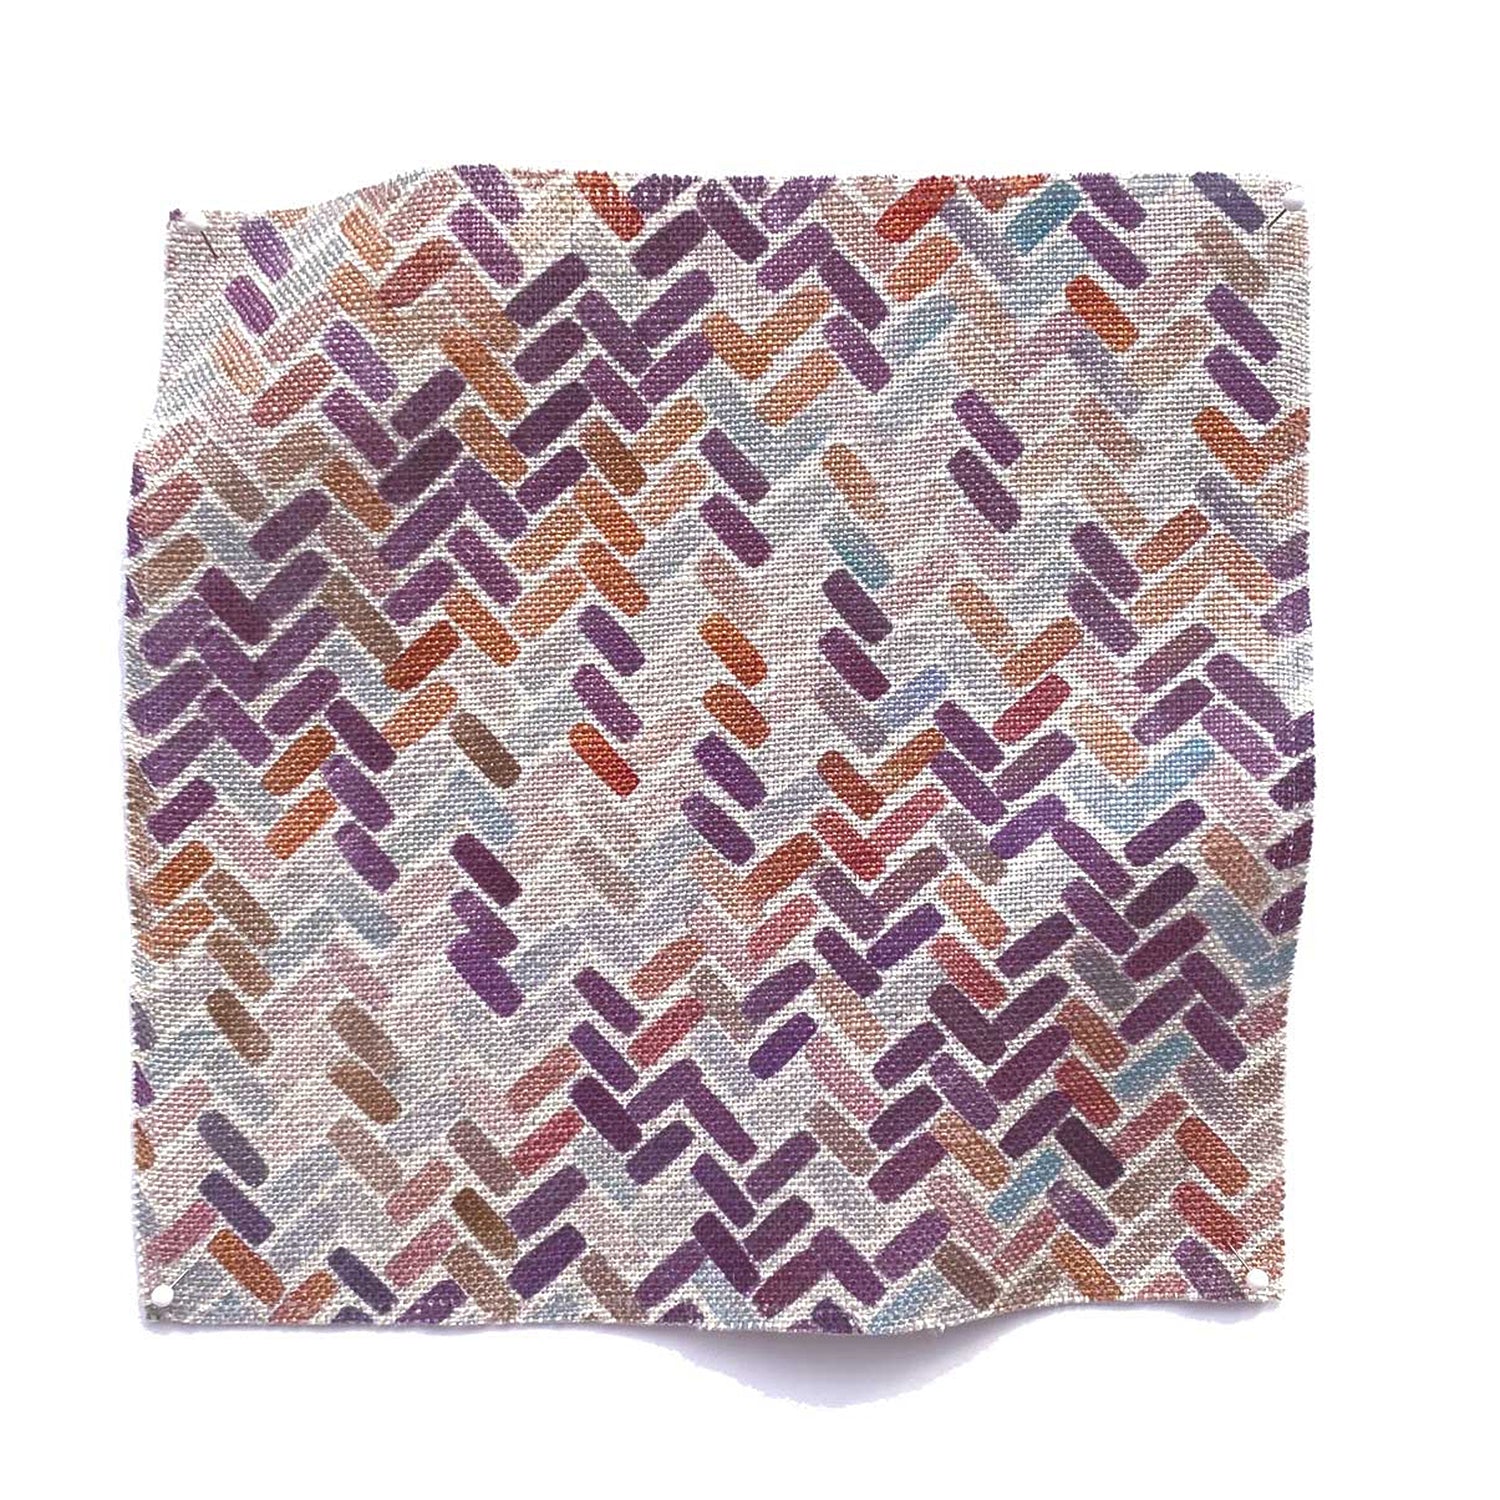 Square fabric swatch in a thatched herringbone pattern in shades of pink, purple, blue and tan.